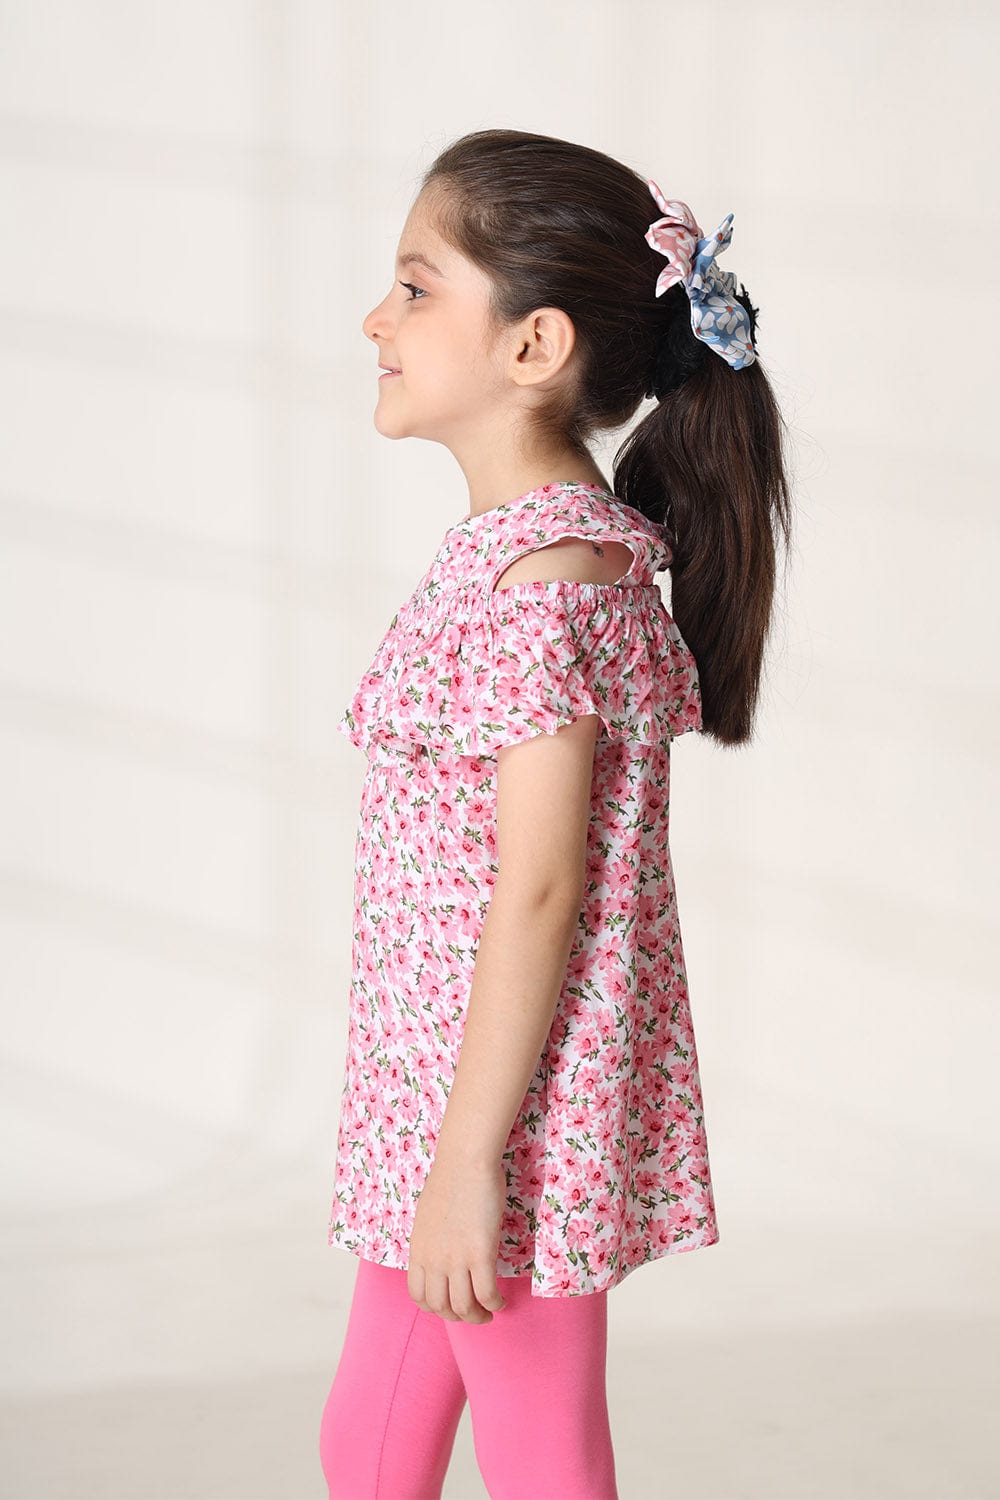 Hope Not Out by Shahid Afridi Eastern Girls Tops Floral Printed Frilled Shirt